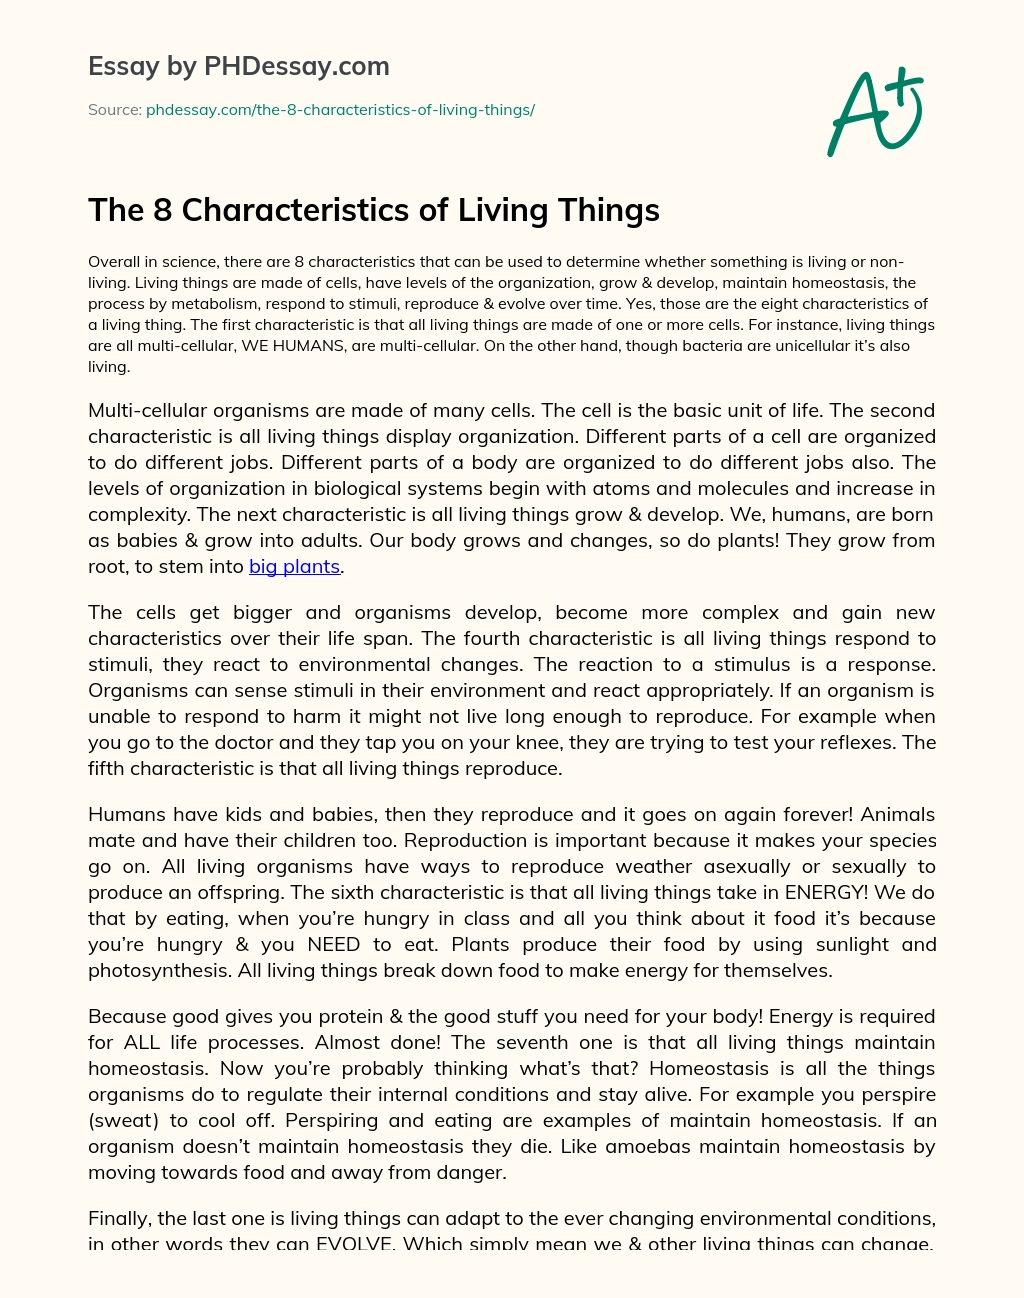 The 8 Characteristics of Living Things essay